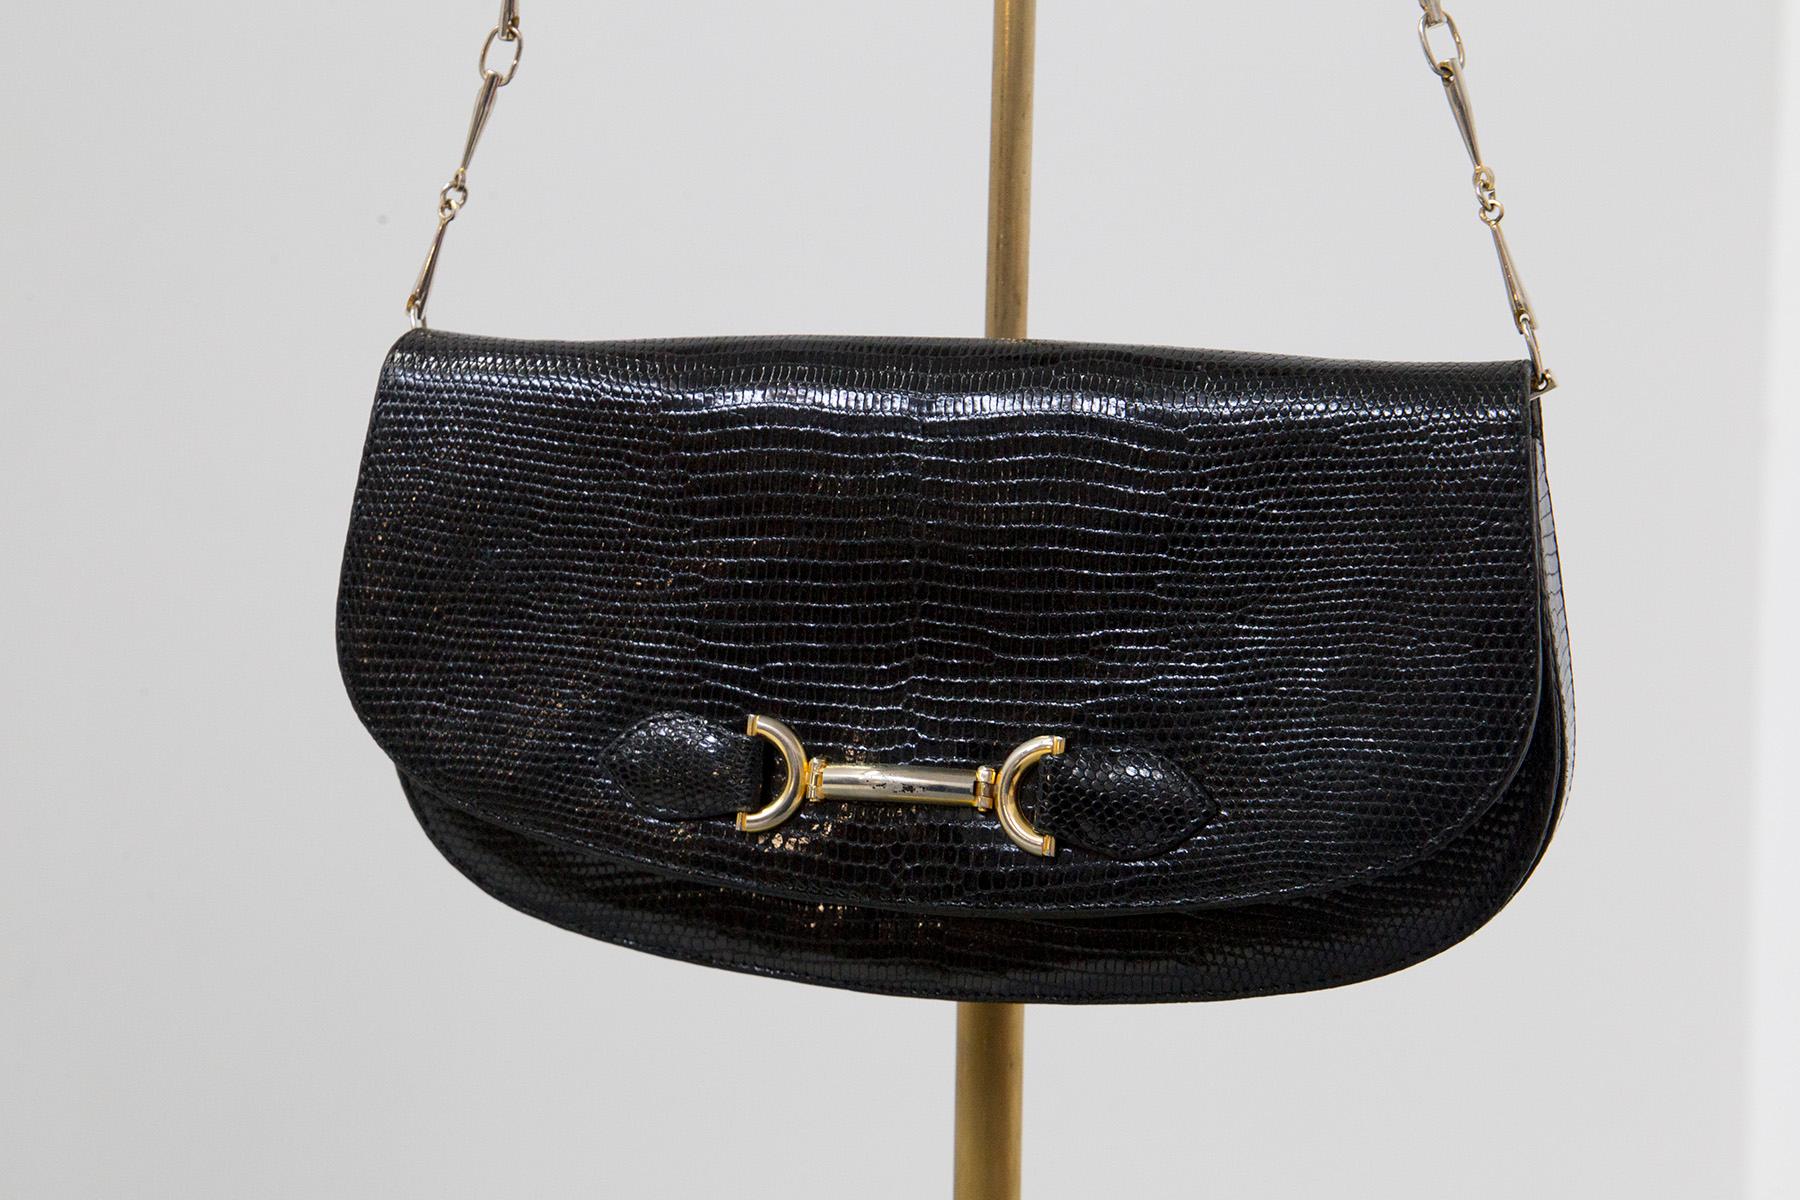 Beautiful vintage bag designed in the 1960s in black leather, fine Italian manufacture.
The bag is a small shoulder or arm bag. It has a beautiful gold metal chain that makes it portable as you wish.
The body of the bag is small and made of shiny